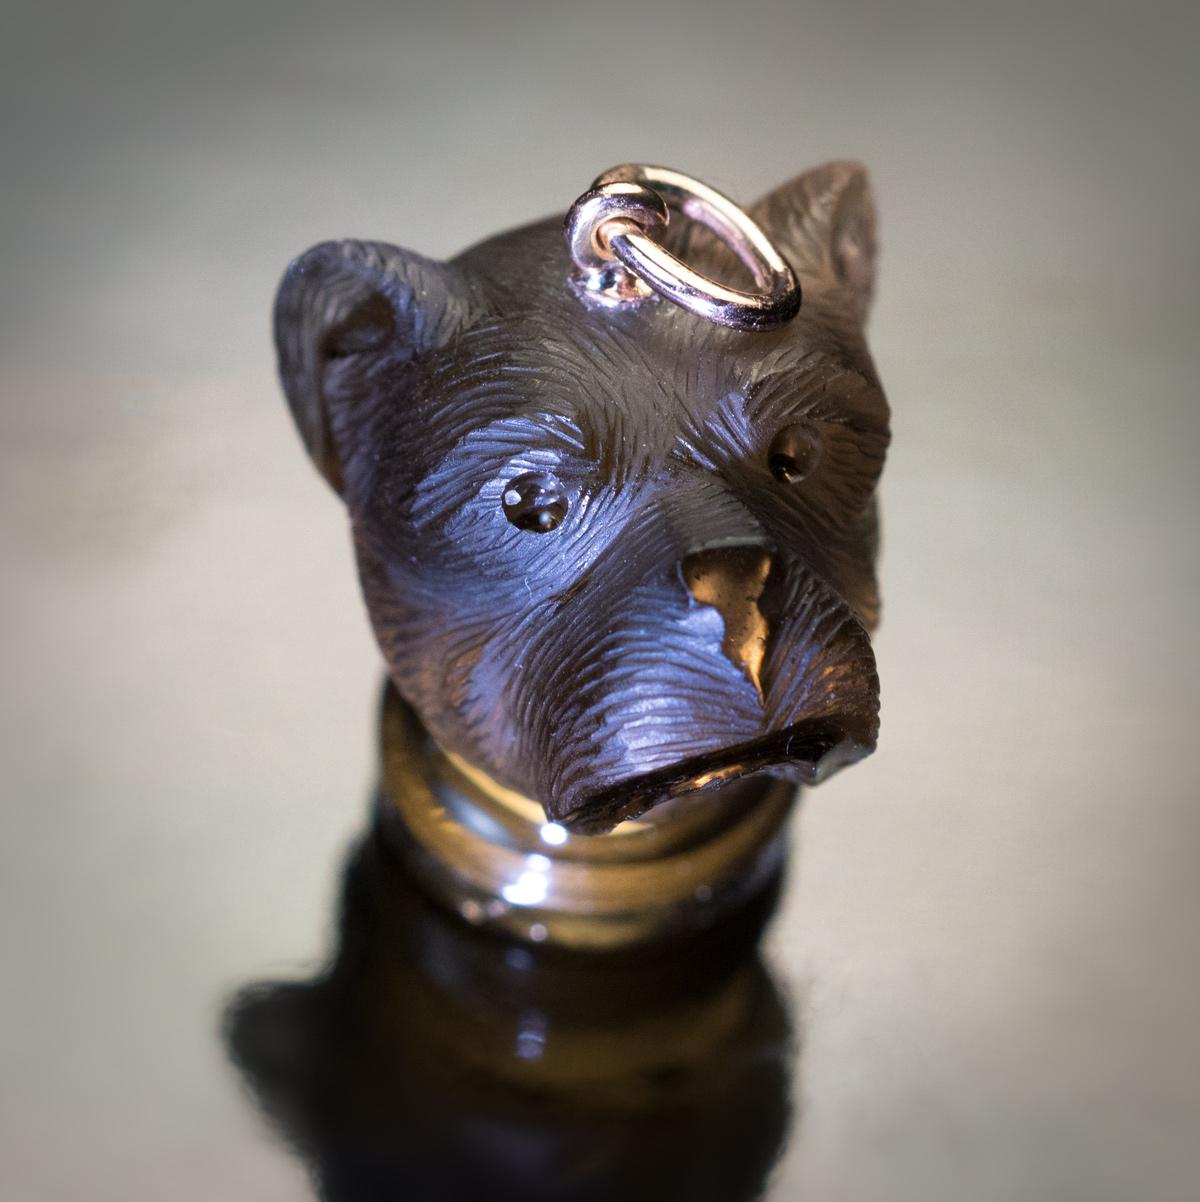 Circa 1880

A Victorian era antique pendant – seal is designed as a dog’s head placed on a round pedestal. The pendant is carved from a single piece of smoky topaz and mounted with a 14K gold suspension ring. The base of the pendant was intended to